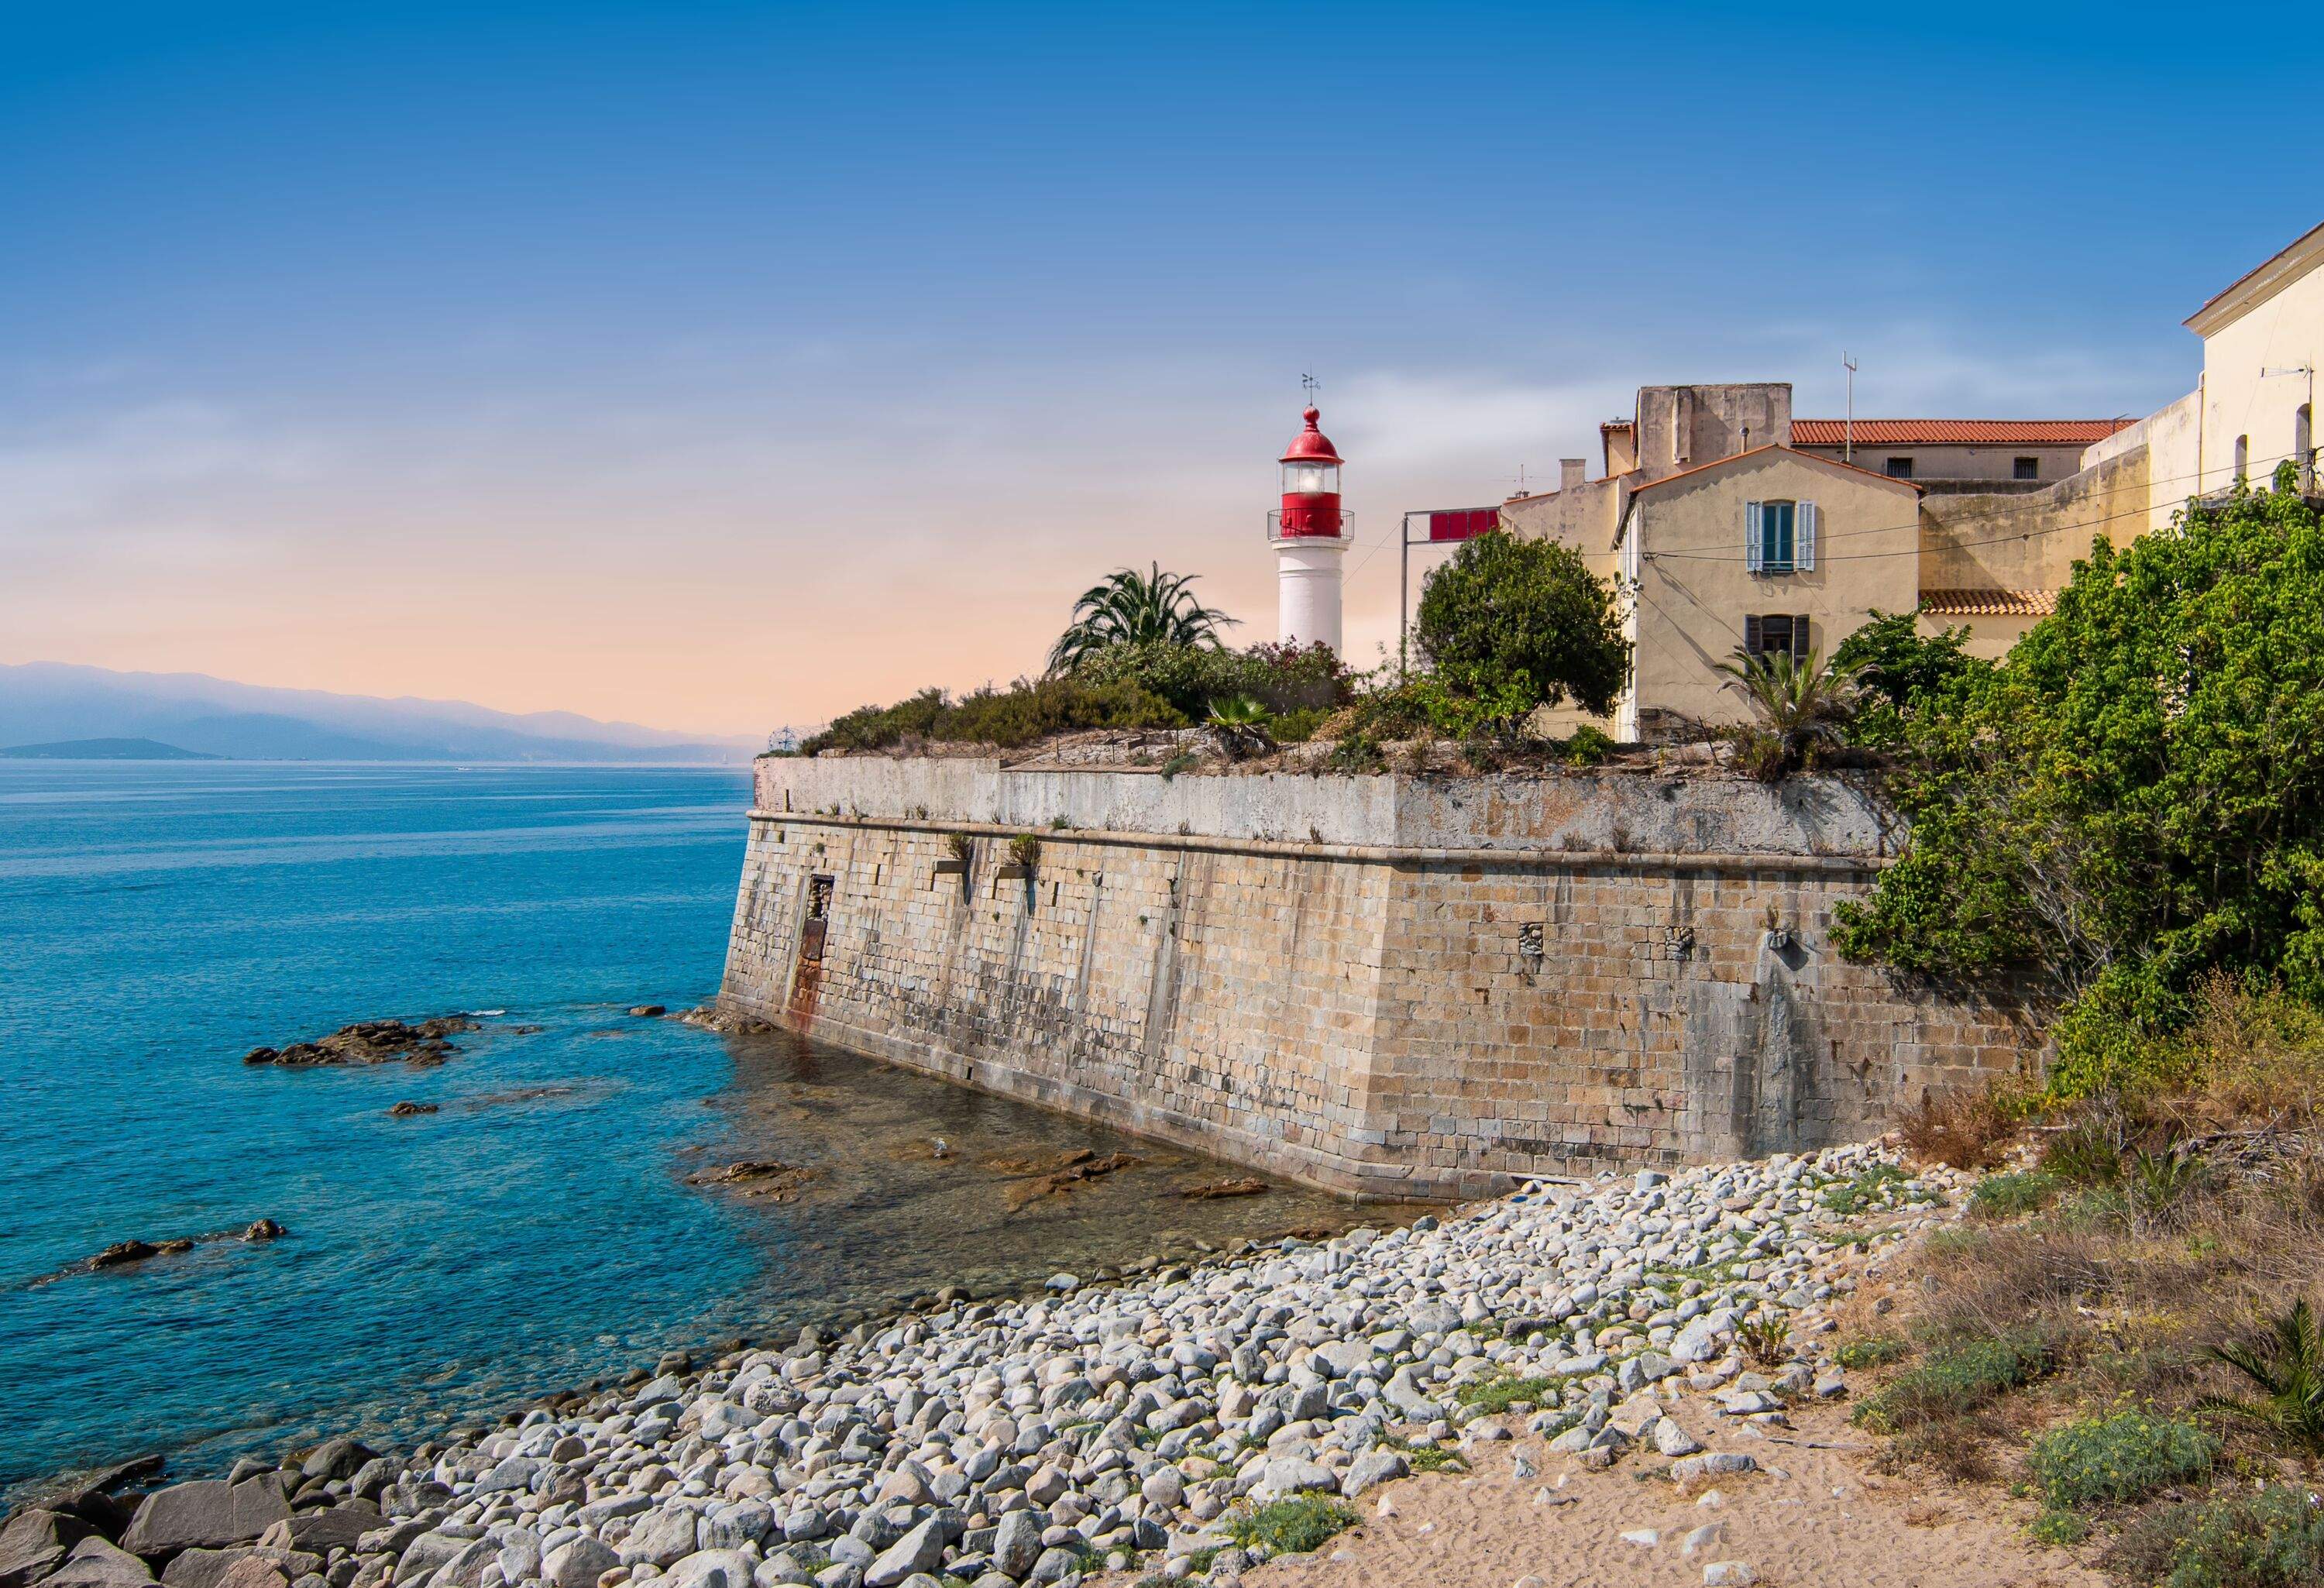 Bright horizontal image with lighthouse at citadel at the coastline, Corsica Island, France. Blue sky.